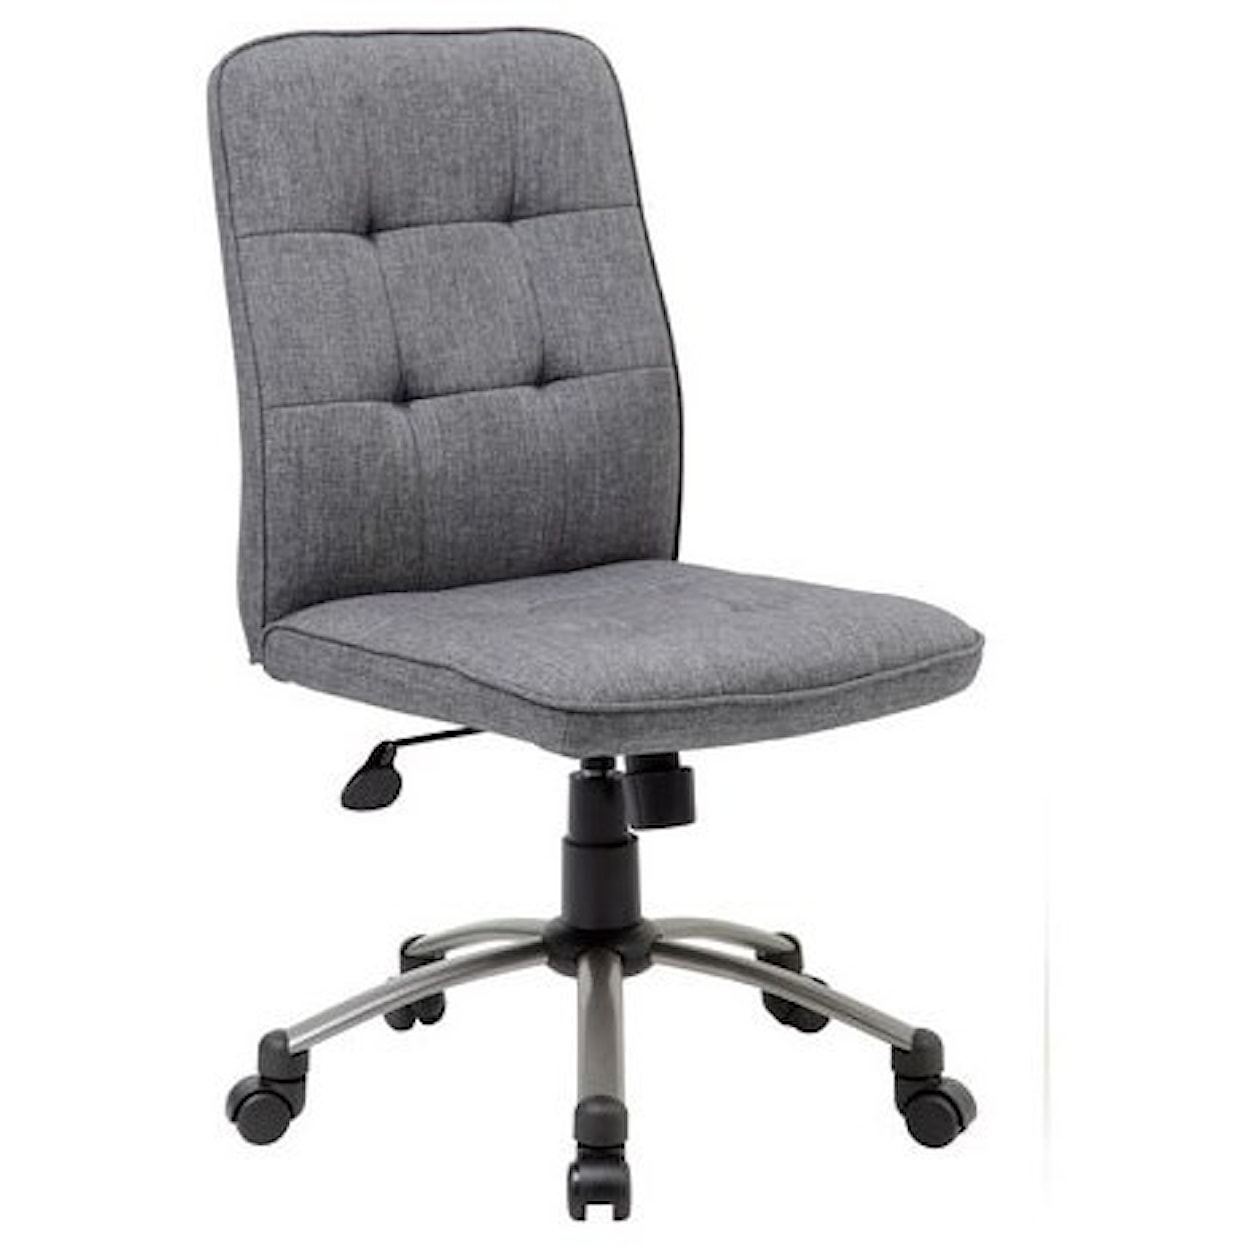 Presidential Seating Office Side Chairs Office Task Chair